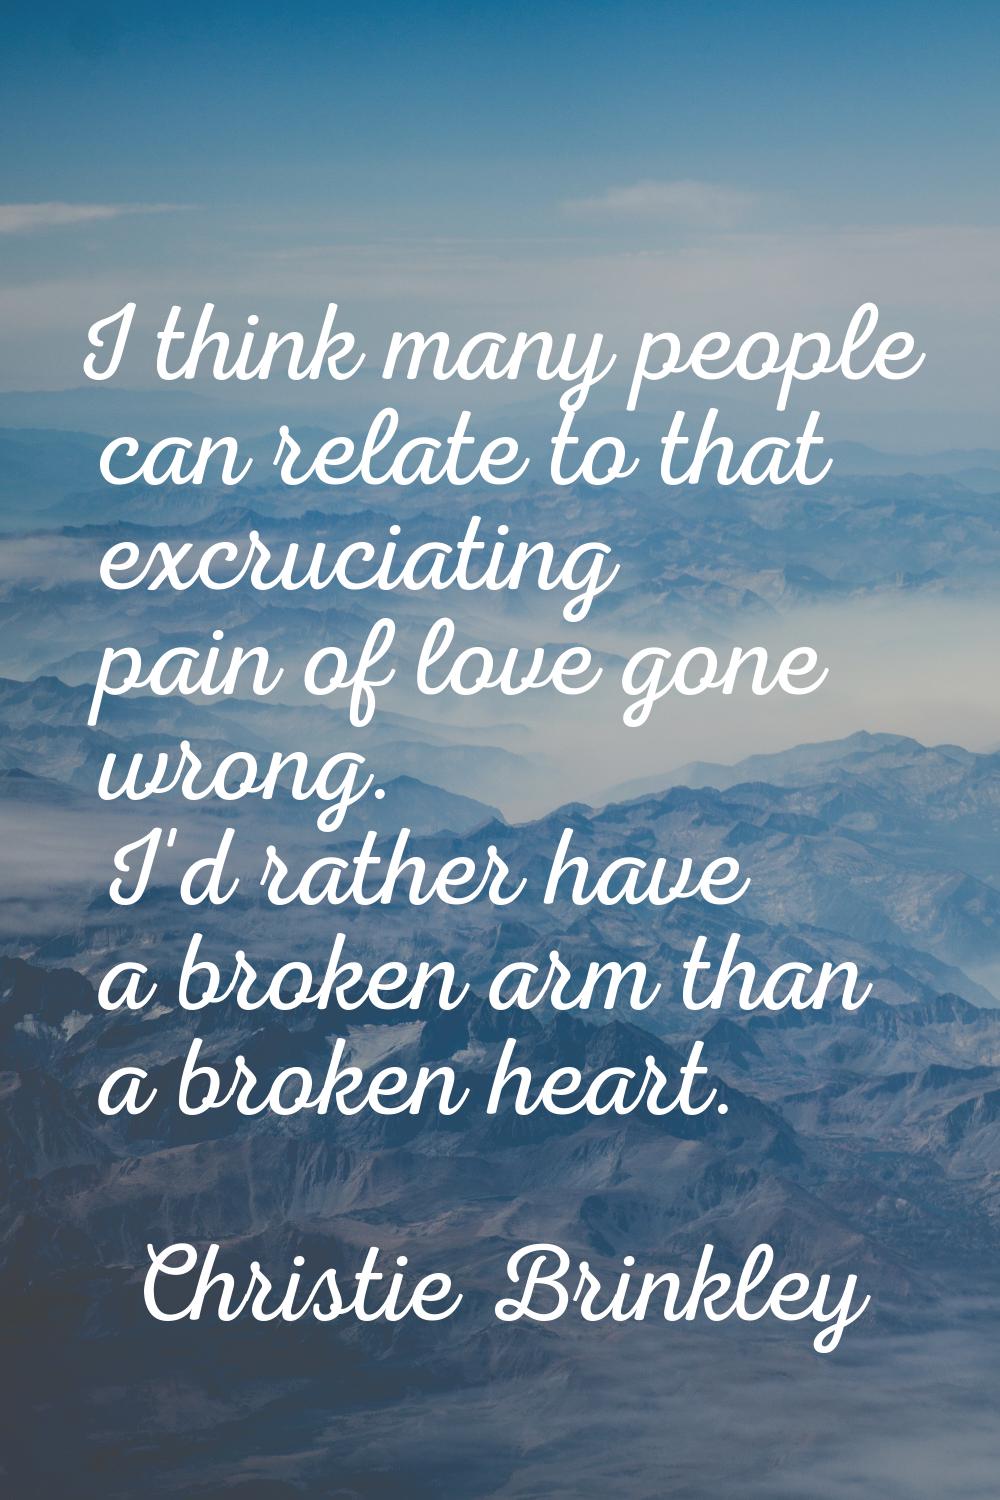 I think many people can relate to that excruciating pain of love gone wrong. I'd rather have a brok